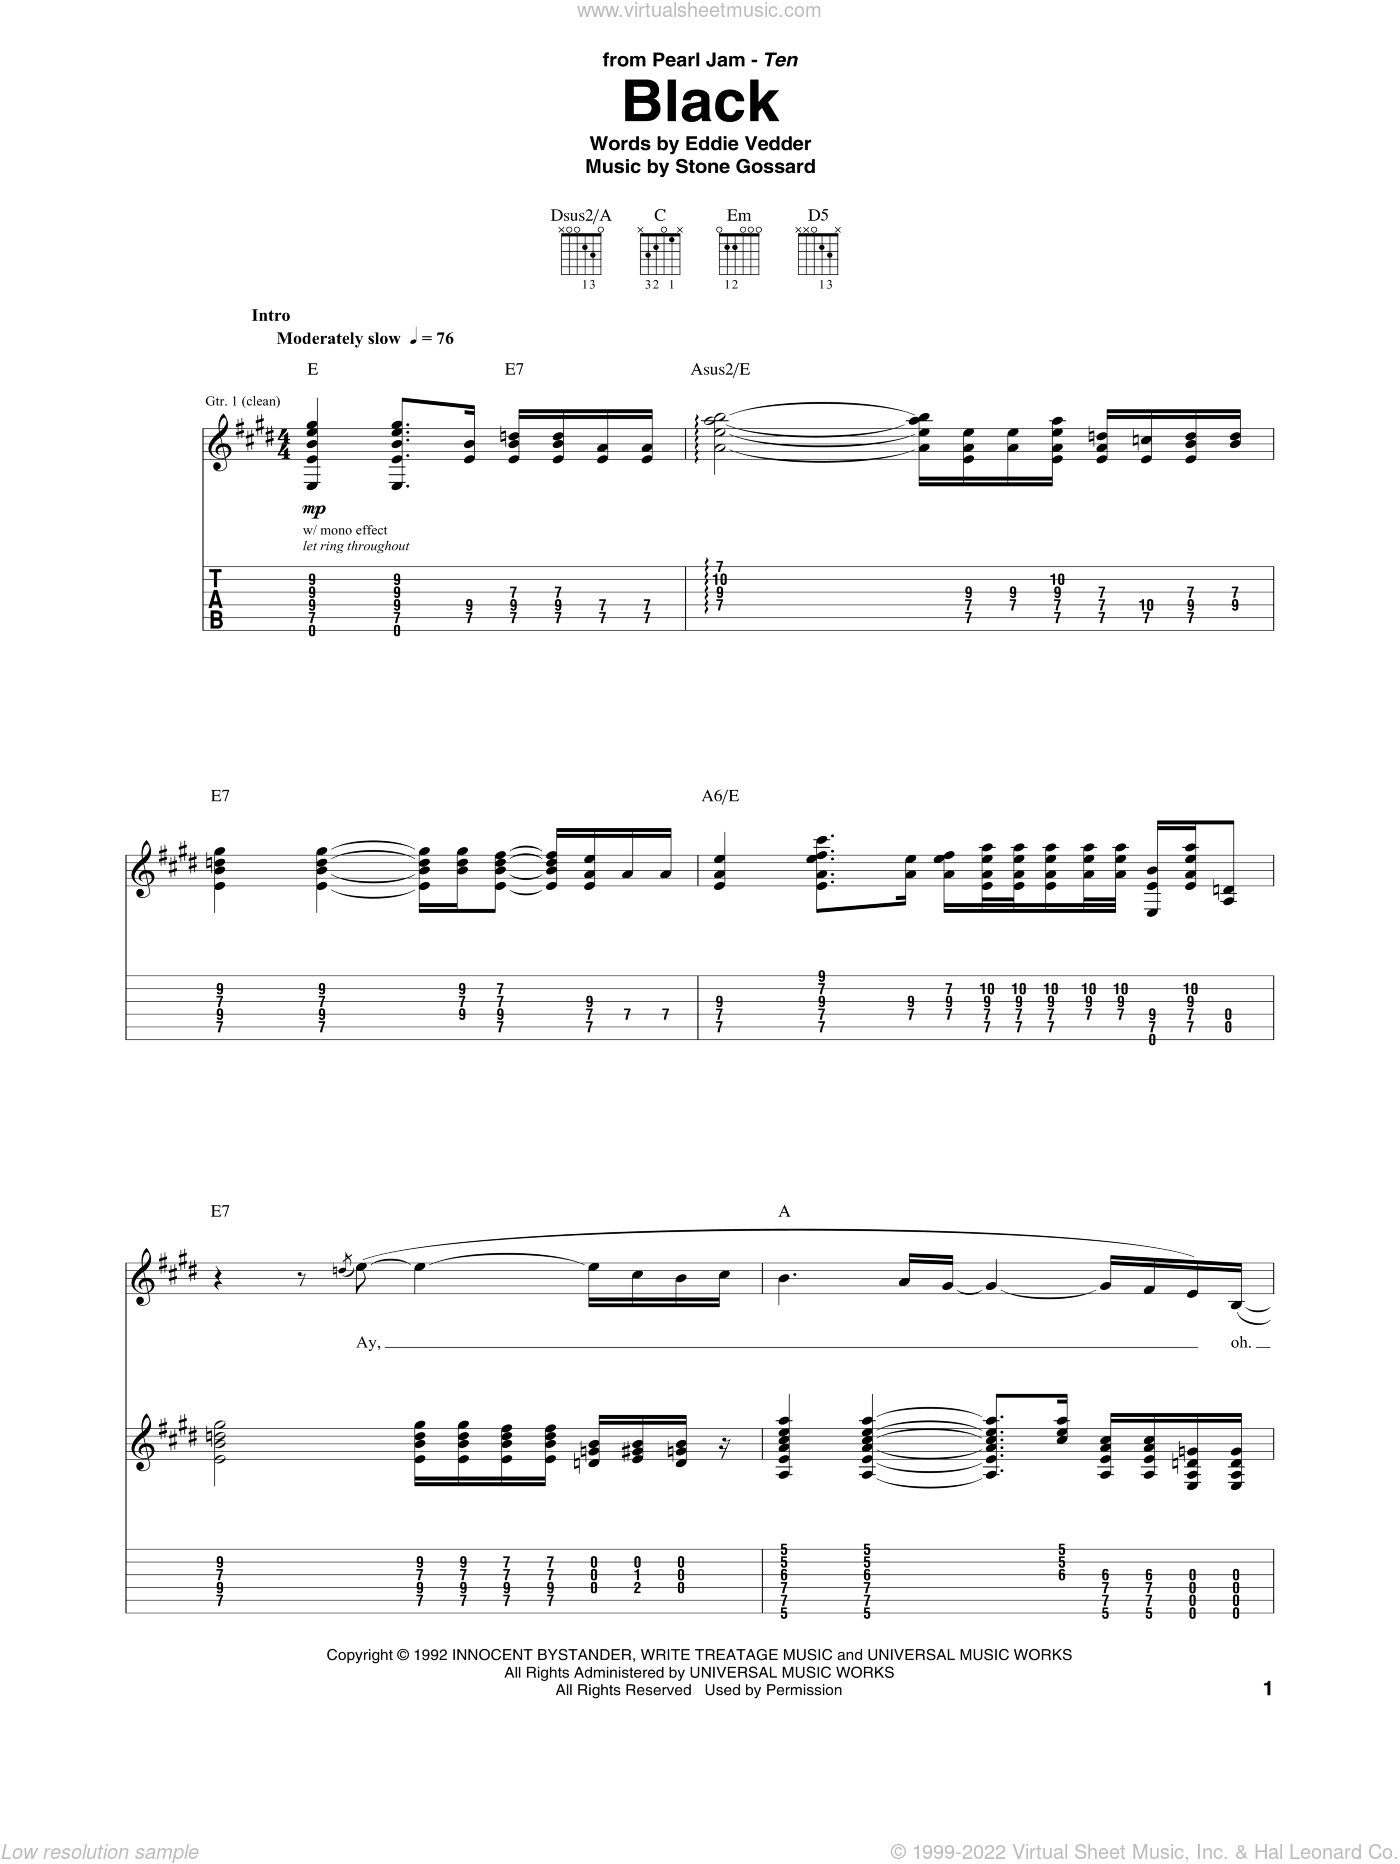 Cover Icon Of Black Sheet Music For Guitar Tablature By Pearl Jam Eddie Vedder And Stone Gossard Intermediate Skill Level